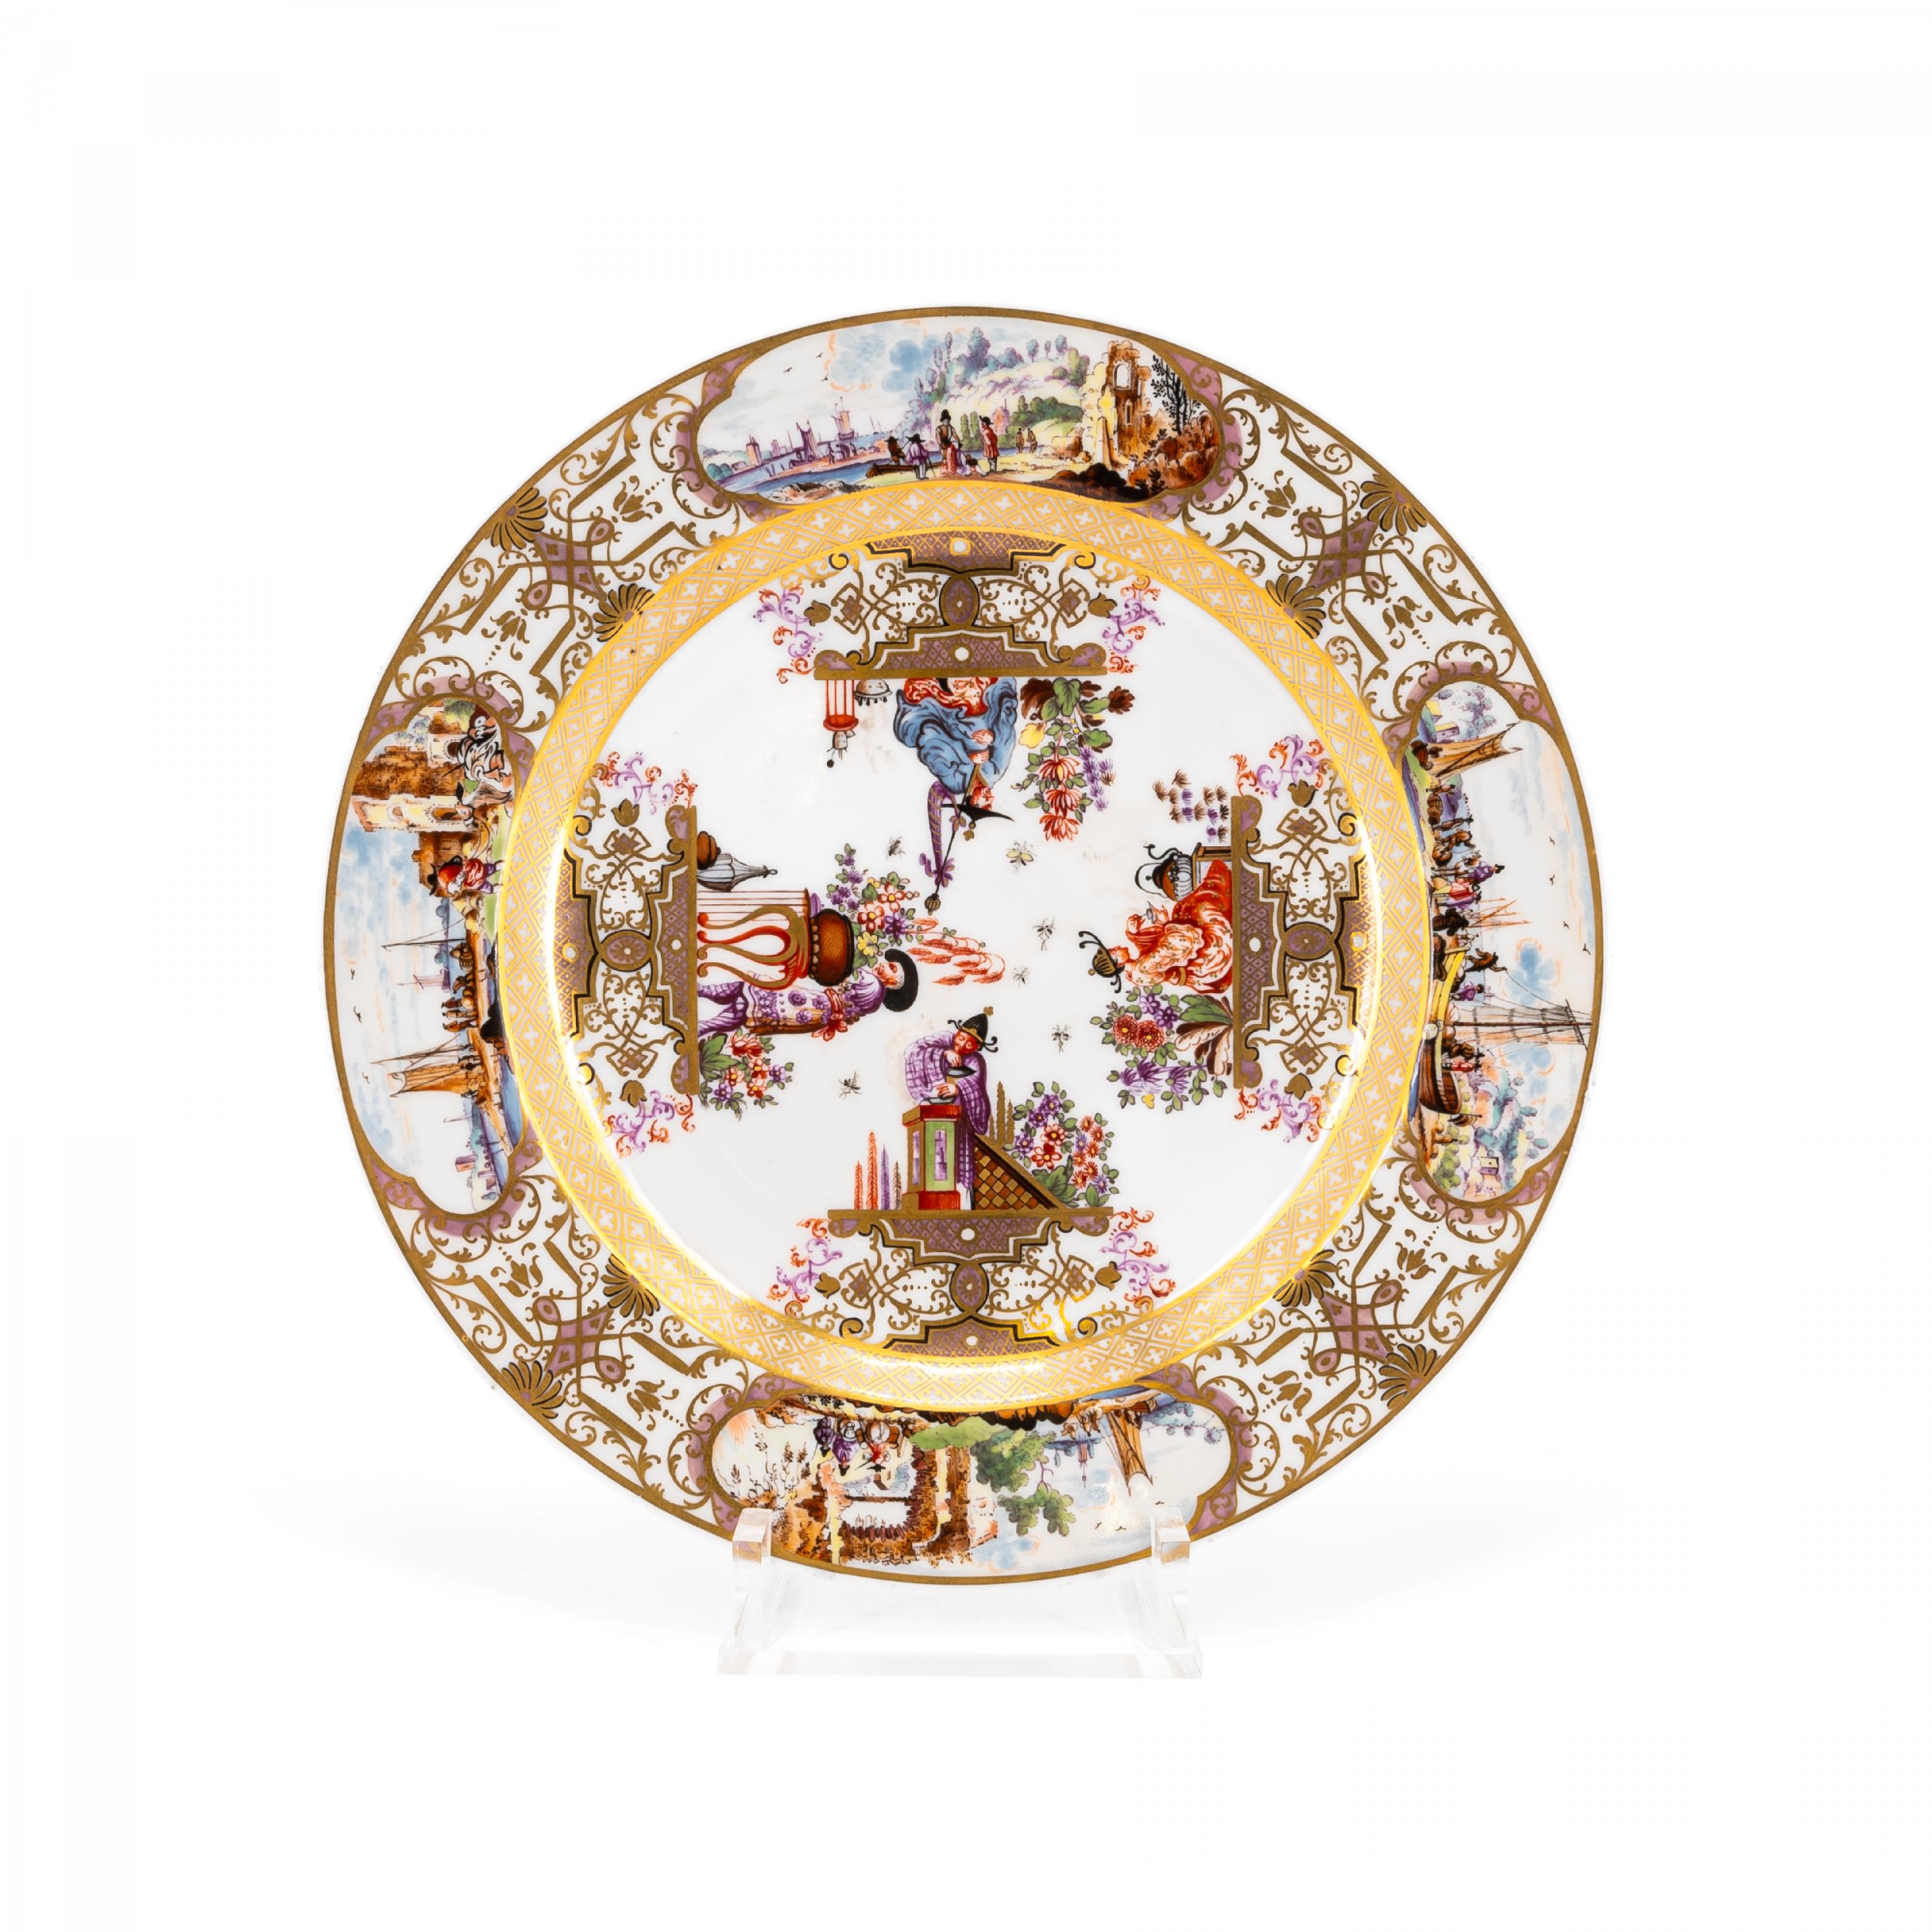 PORCELAIN PLATE WITH CHINOISERIES AND MERCHANT NAVY SCENE - Image 2 of 3